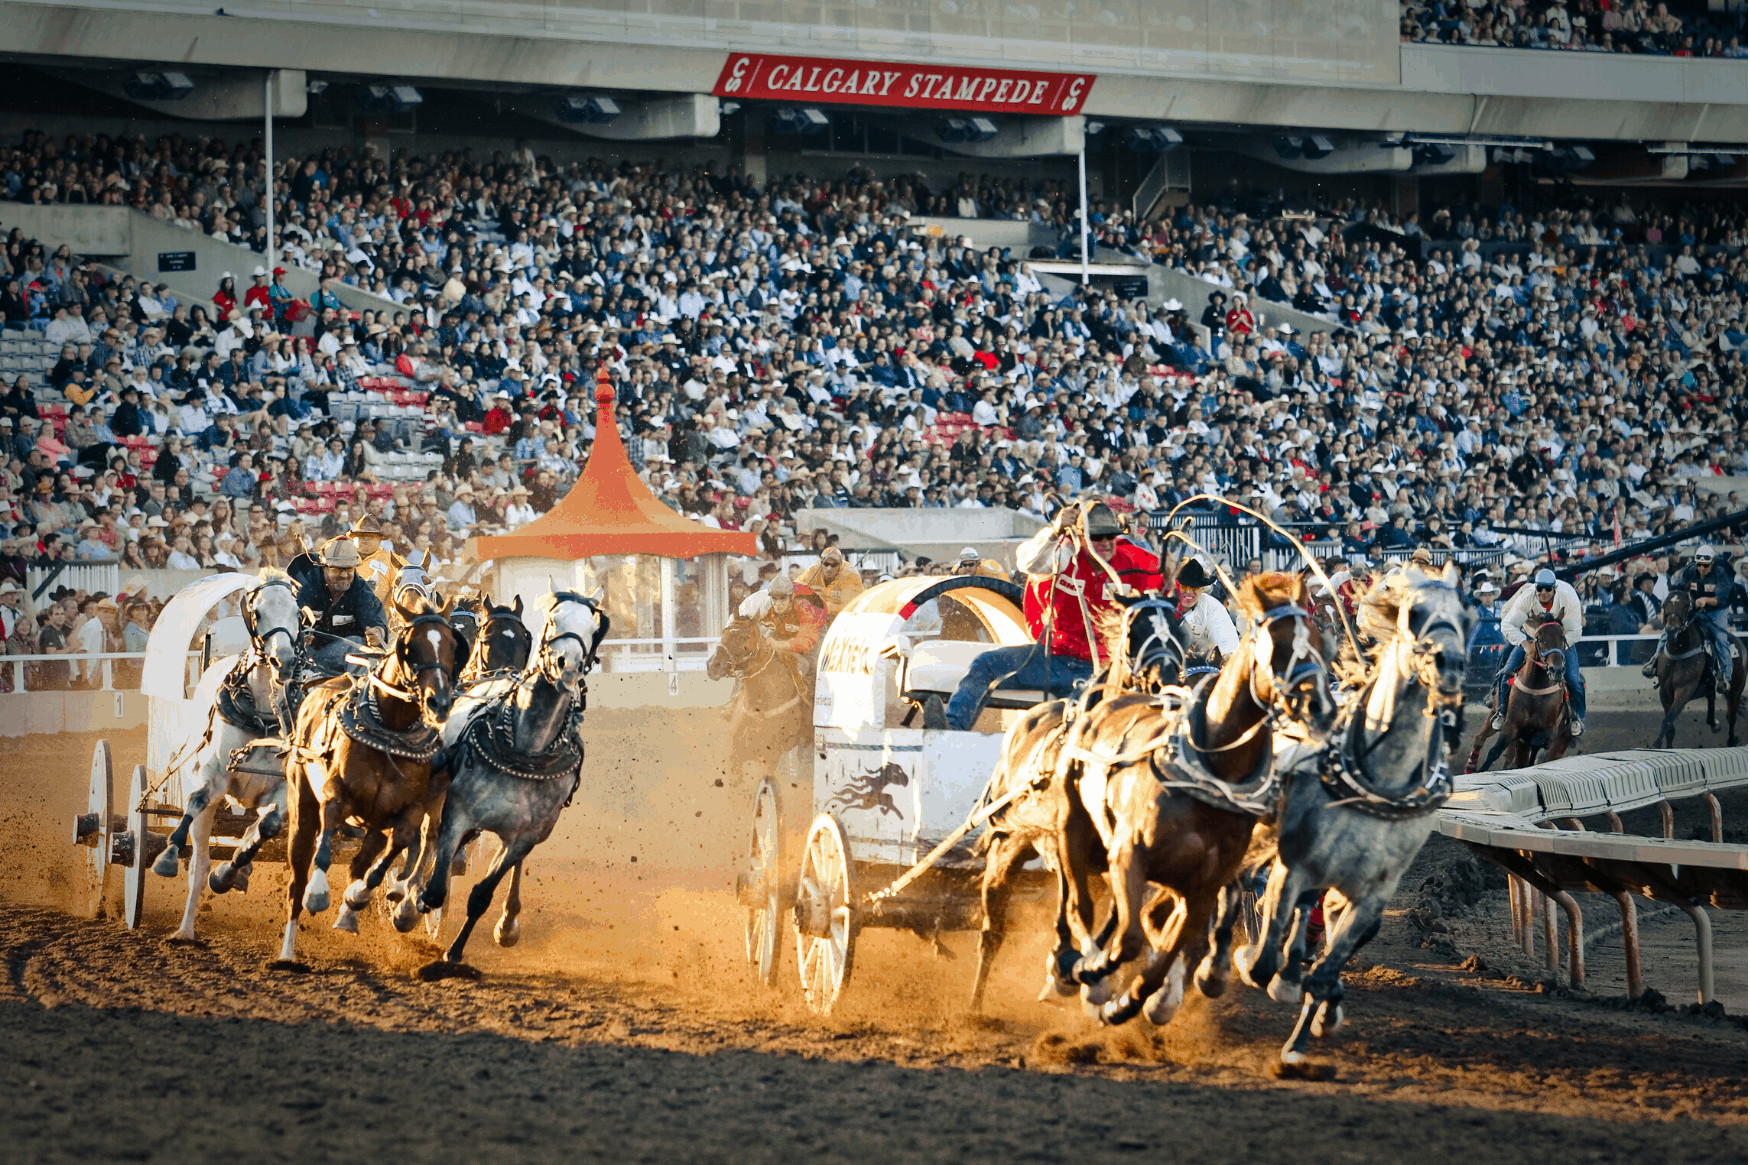 Rodeo, Calgary Stampede - The Greatest Outdoor Show on Earth